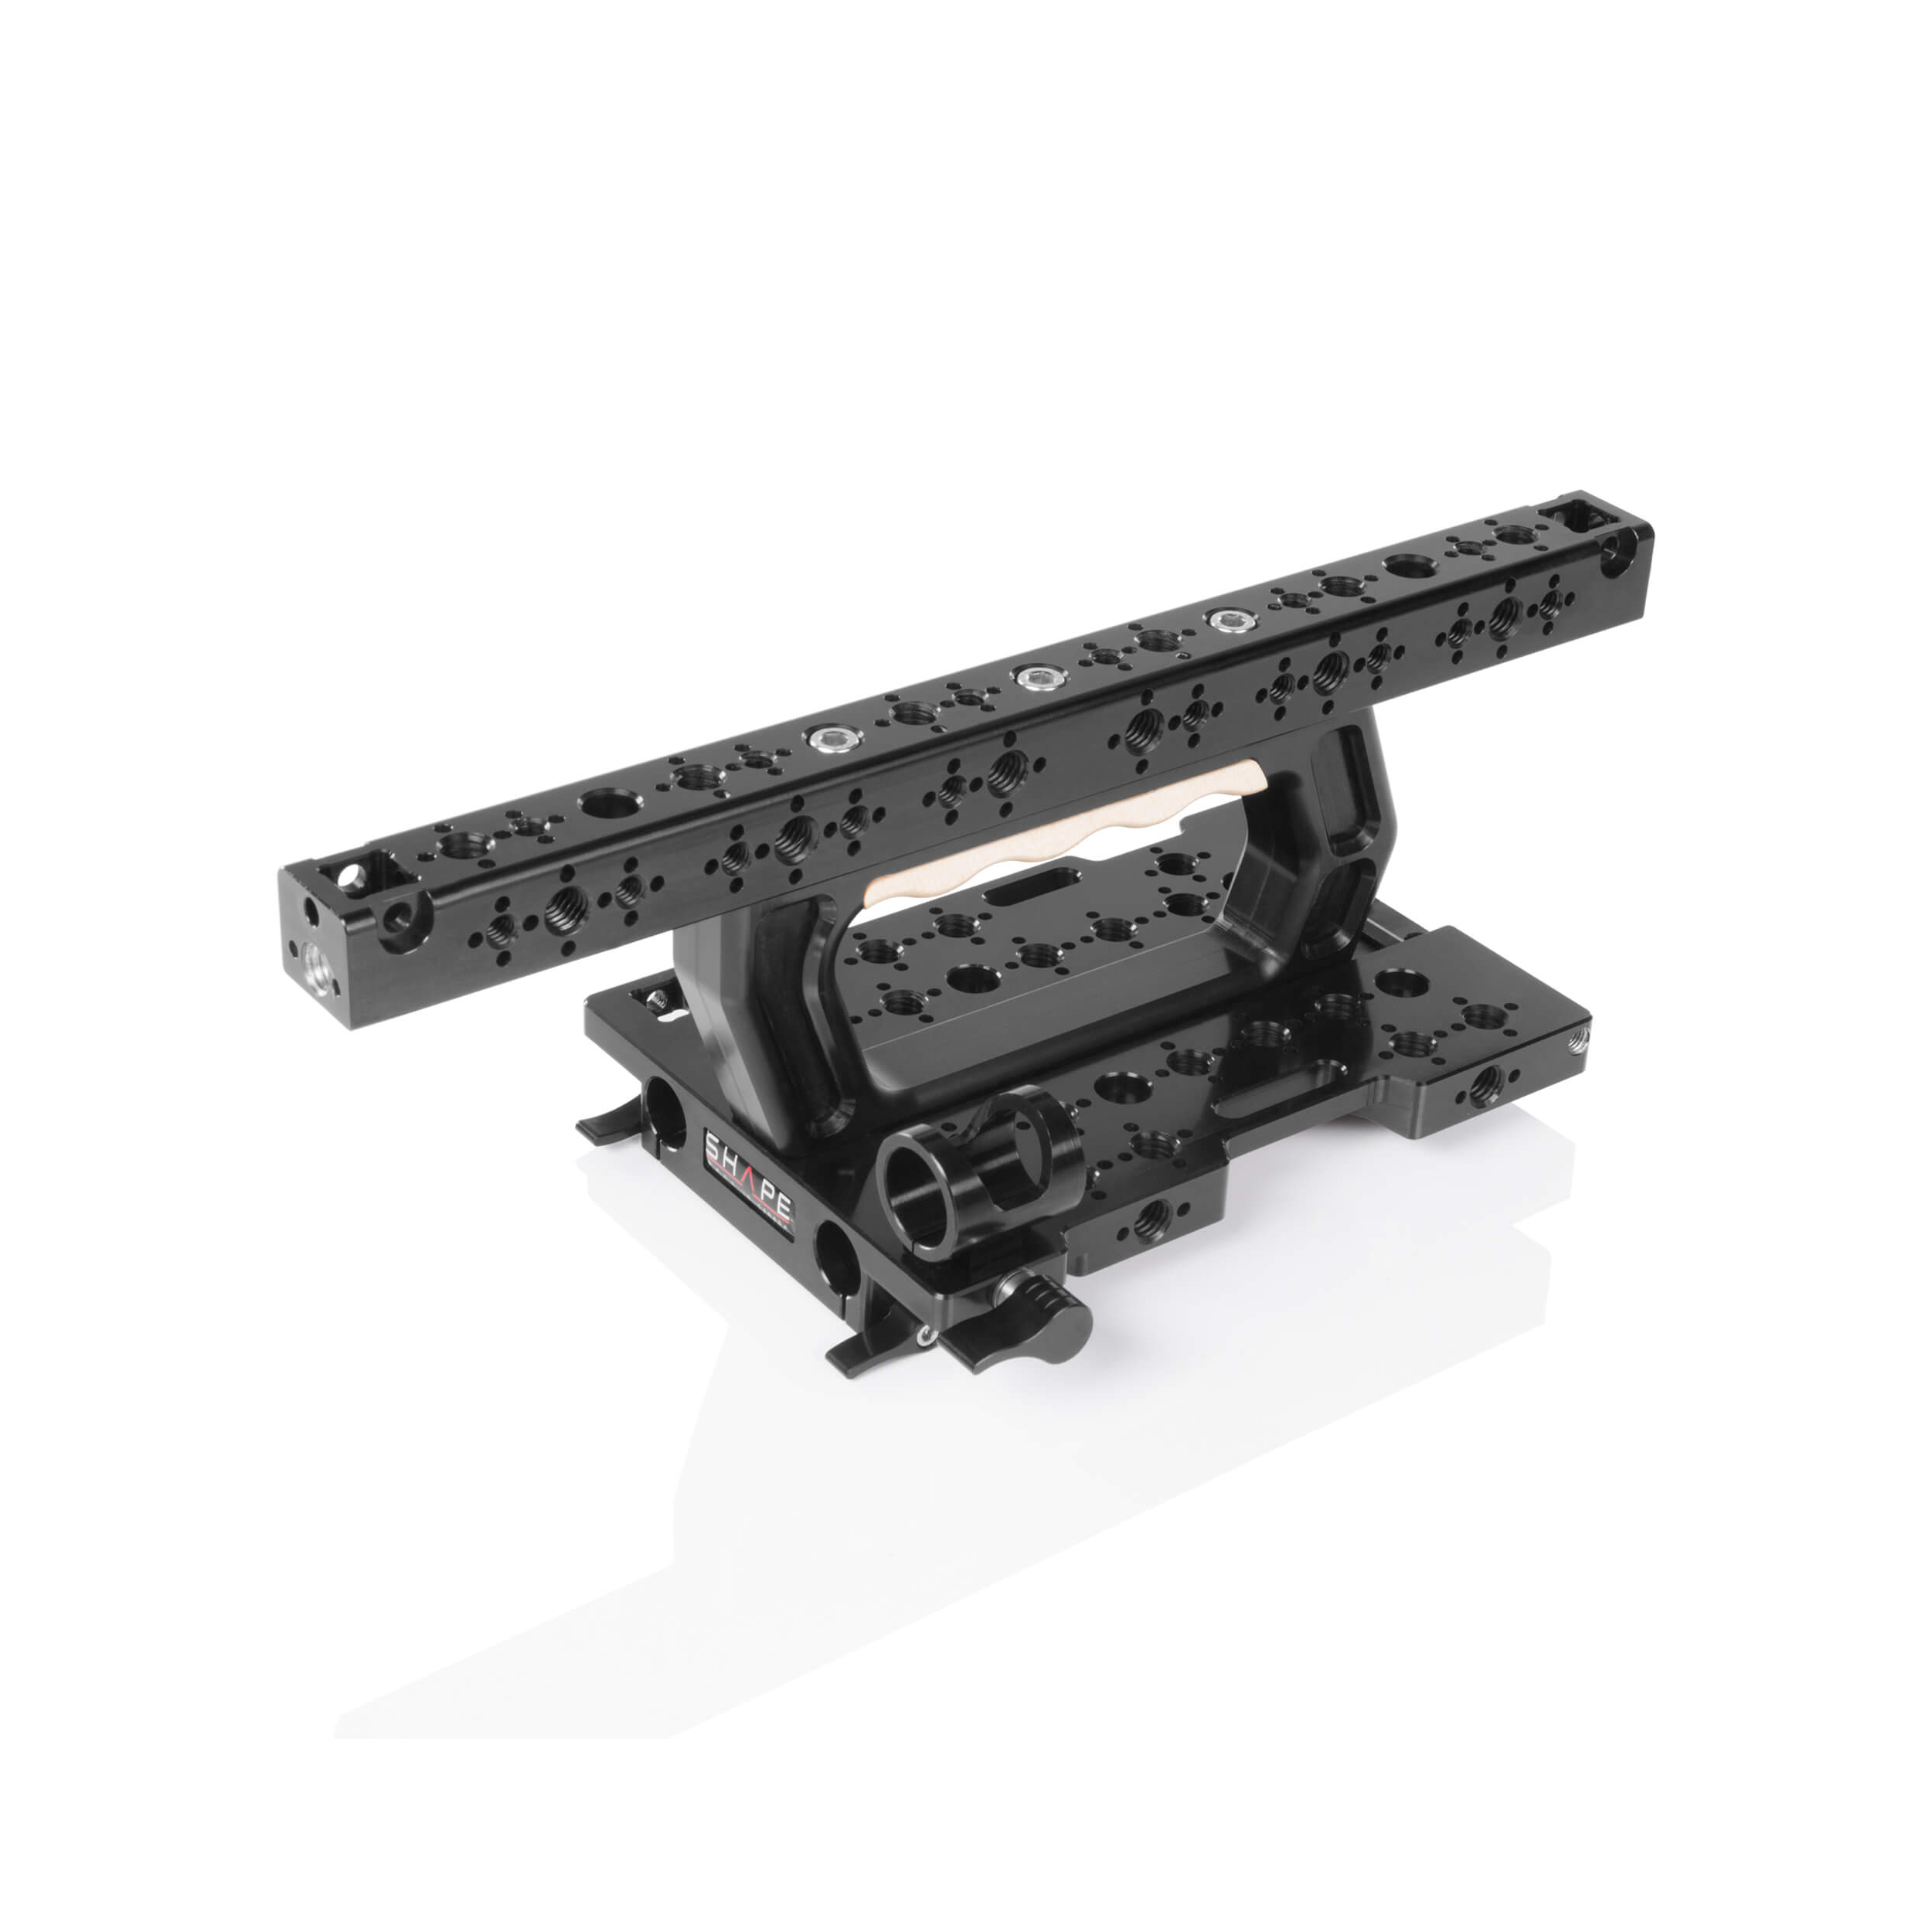 SHAPE Top Handgrip and Top Plate for Sony VENICE